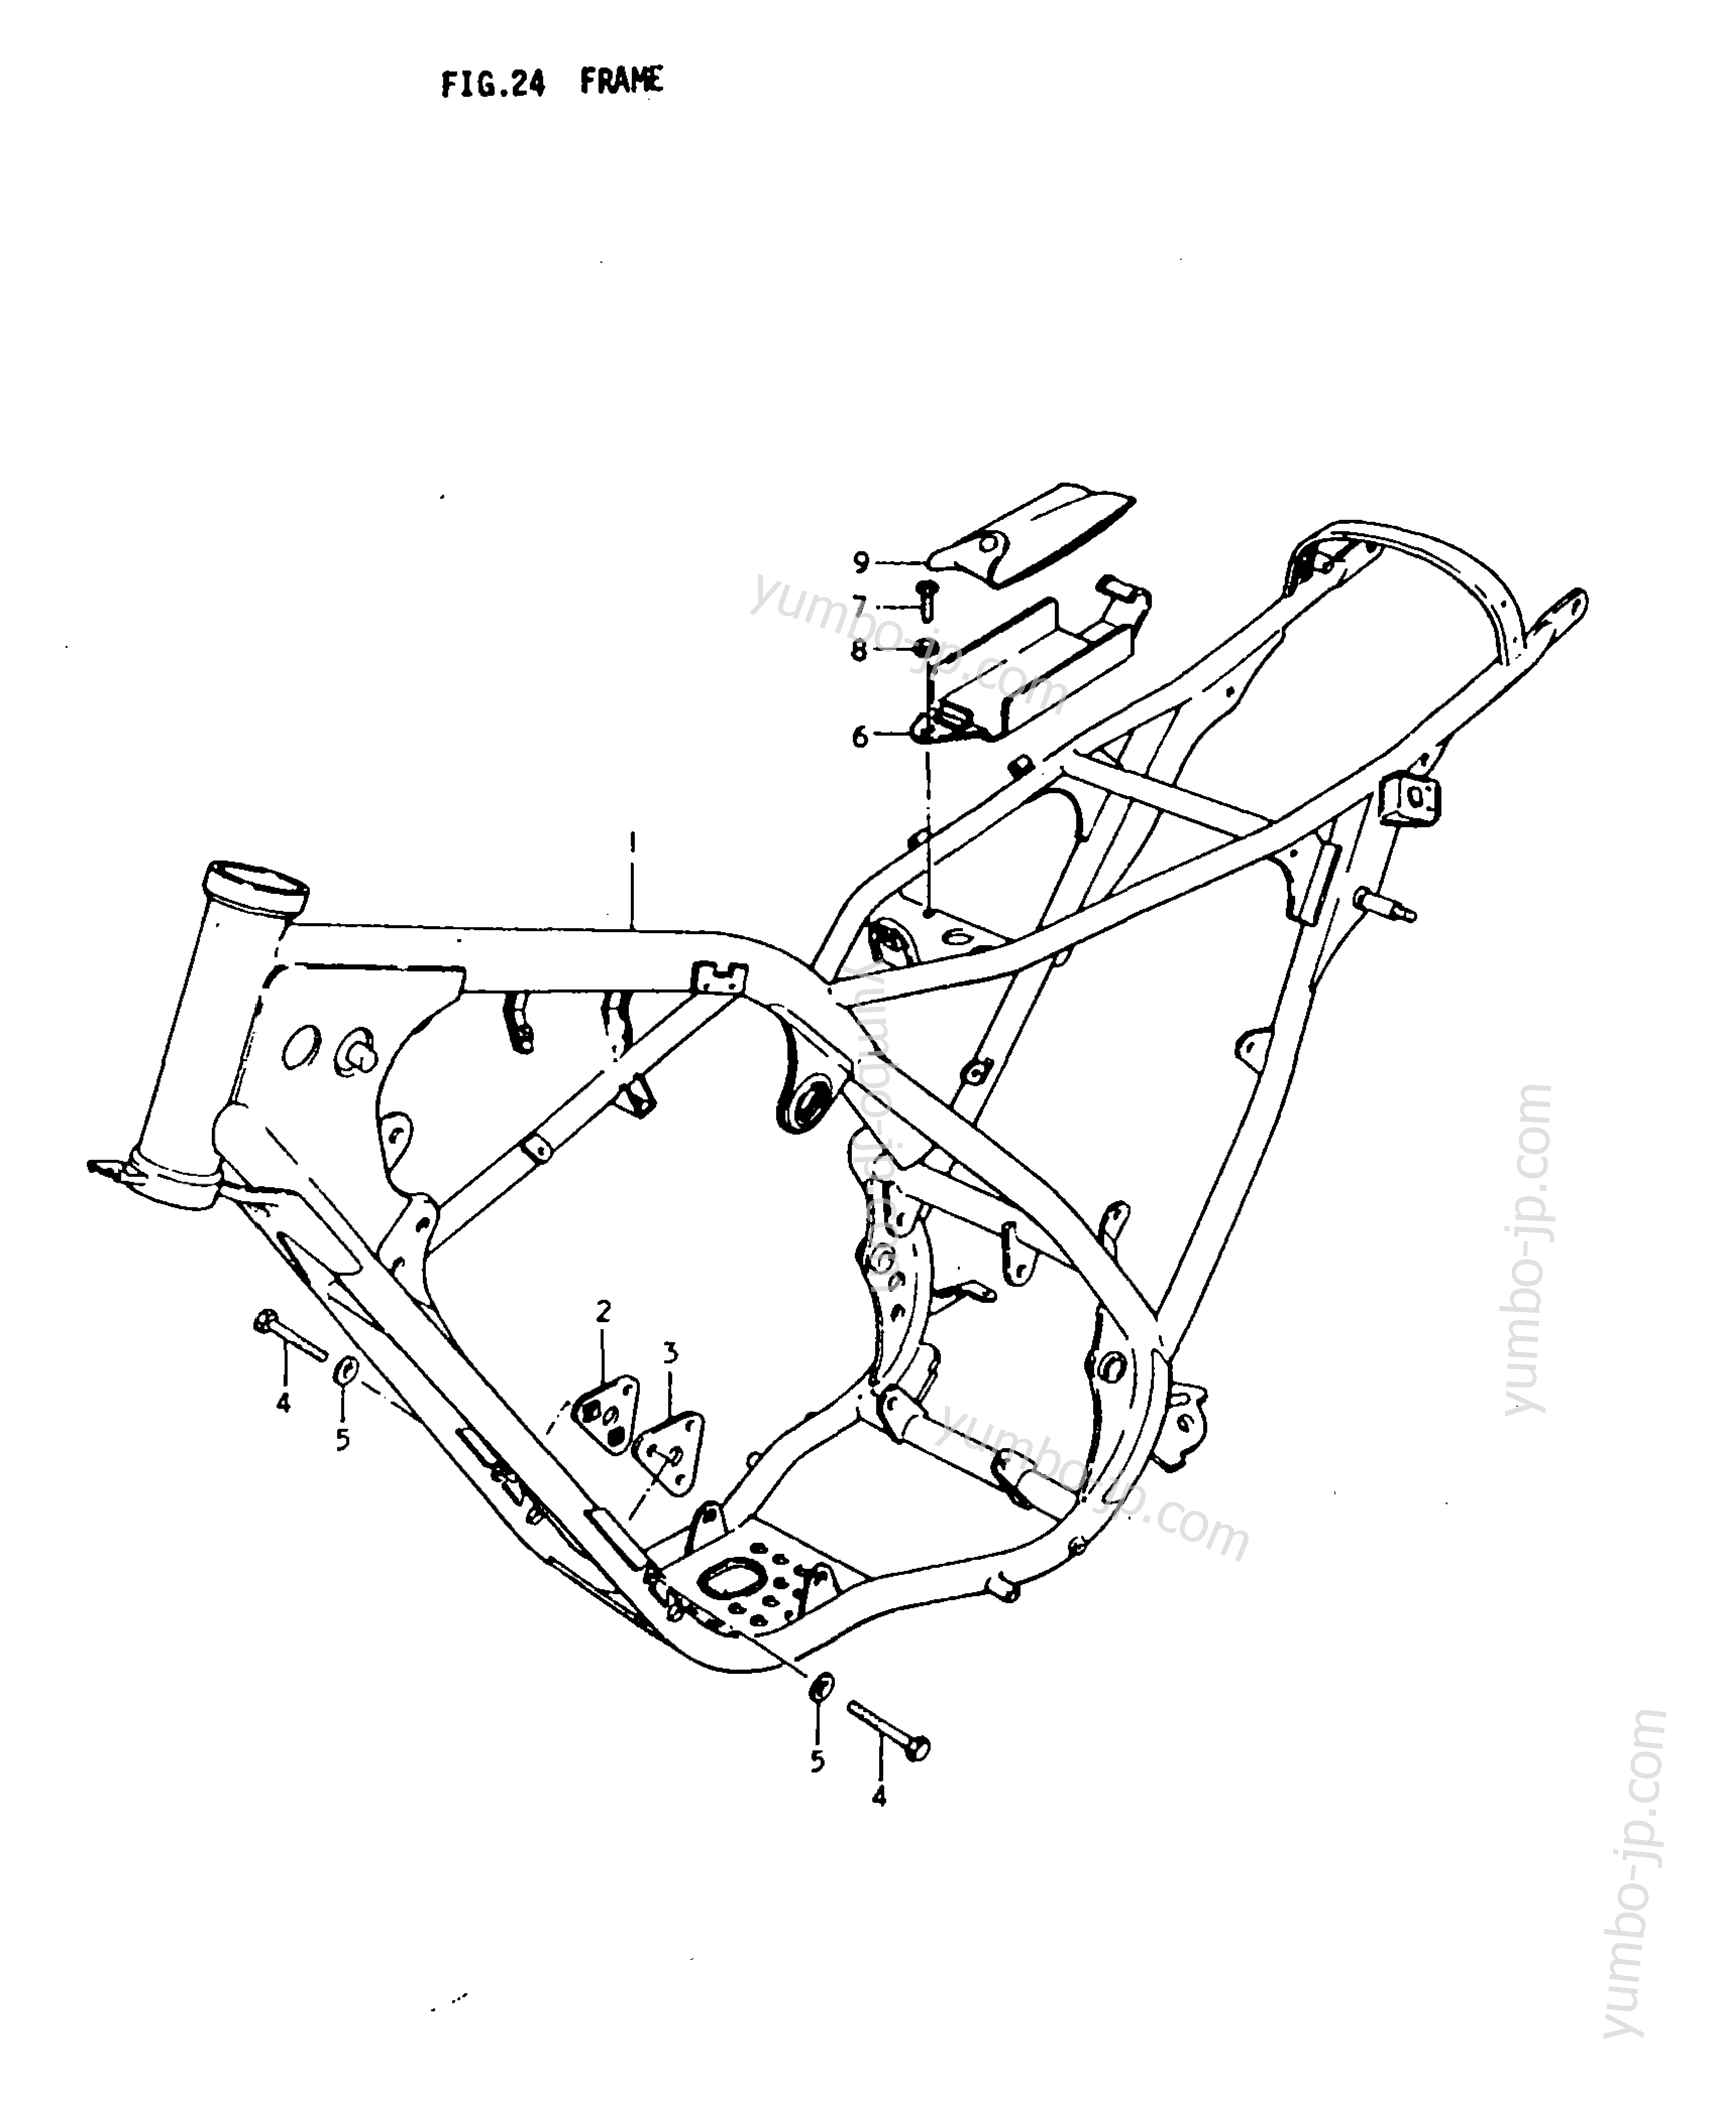 FRAME for motorcycles SUZUKI TS250 1977 year